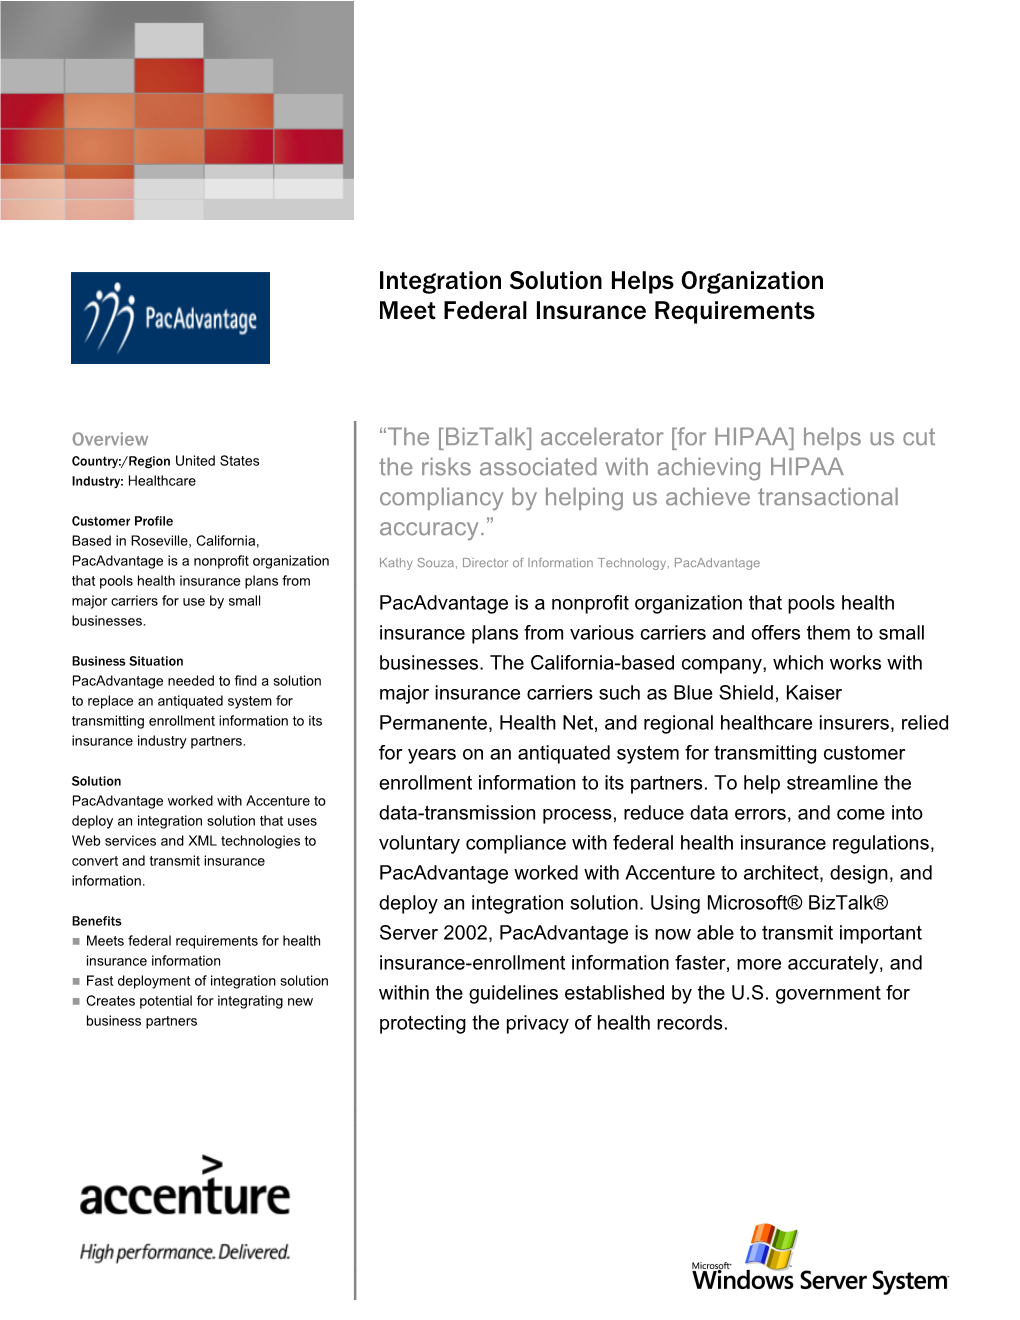 Integration Solution Helps Organization Meet Federal Insurance Requirements